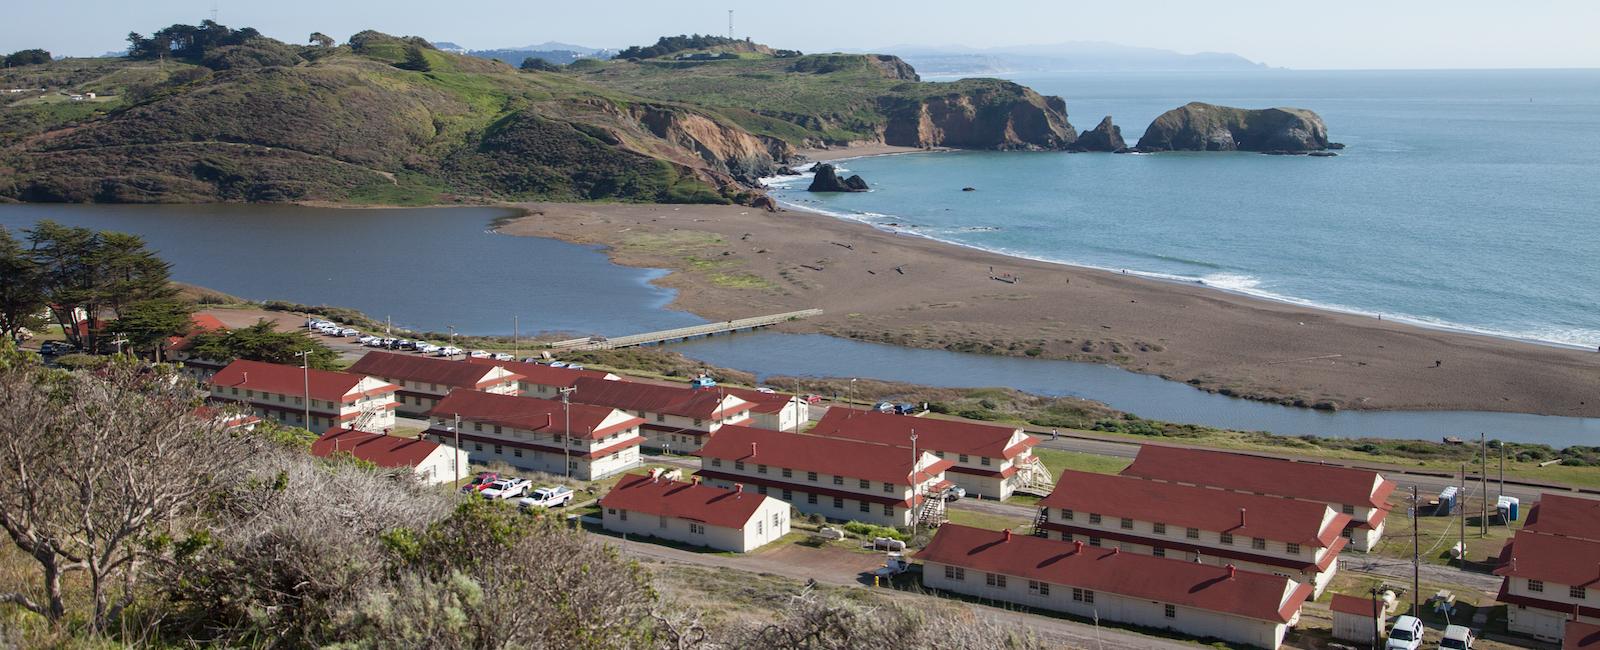 Fort Cronkhite and Rodeo Beach 